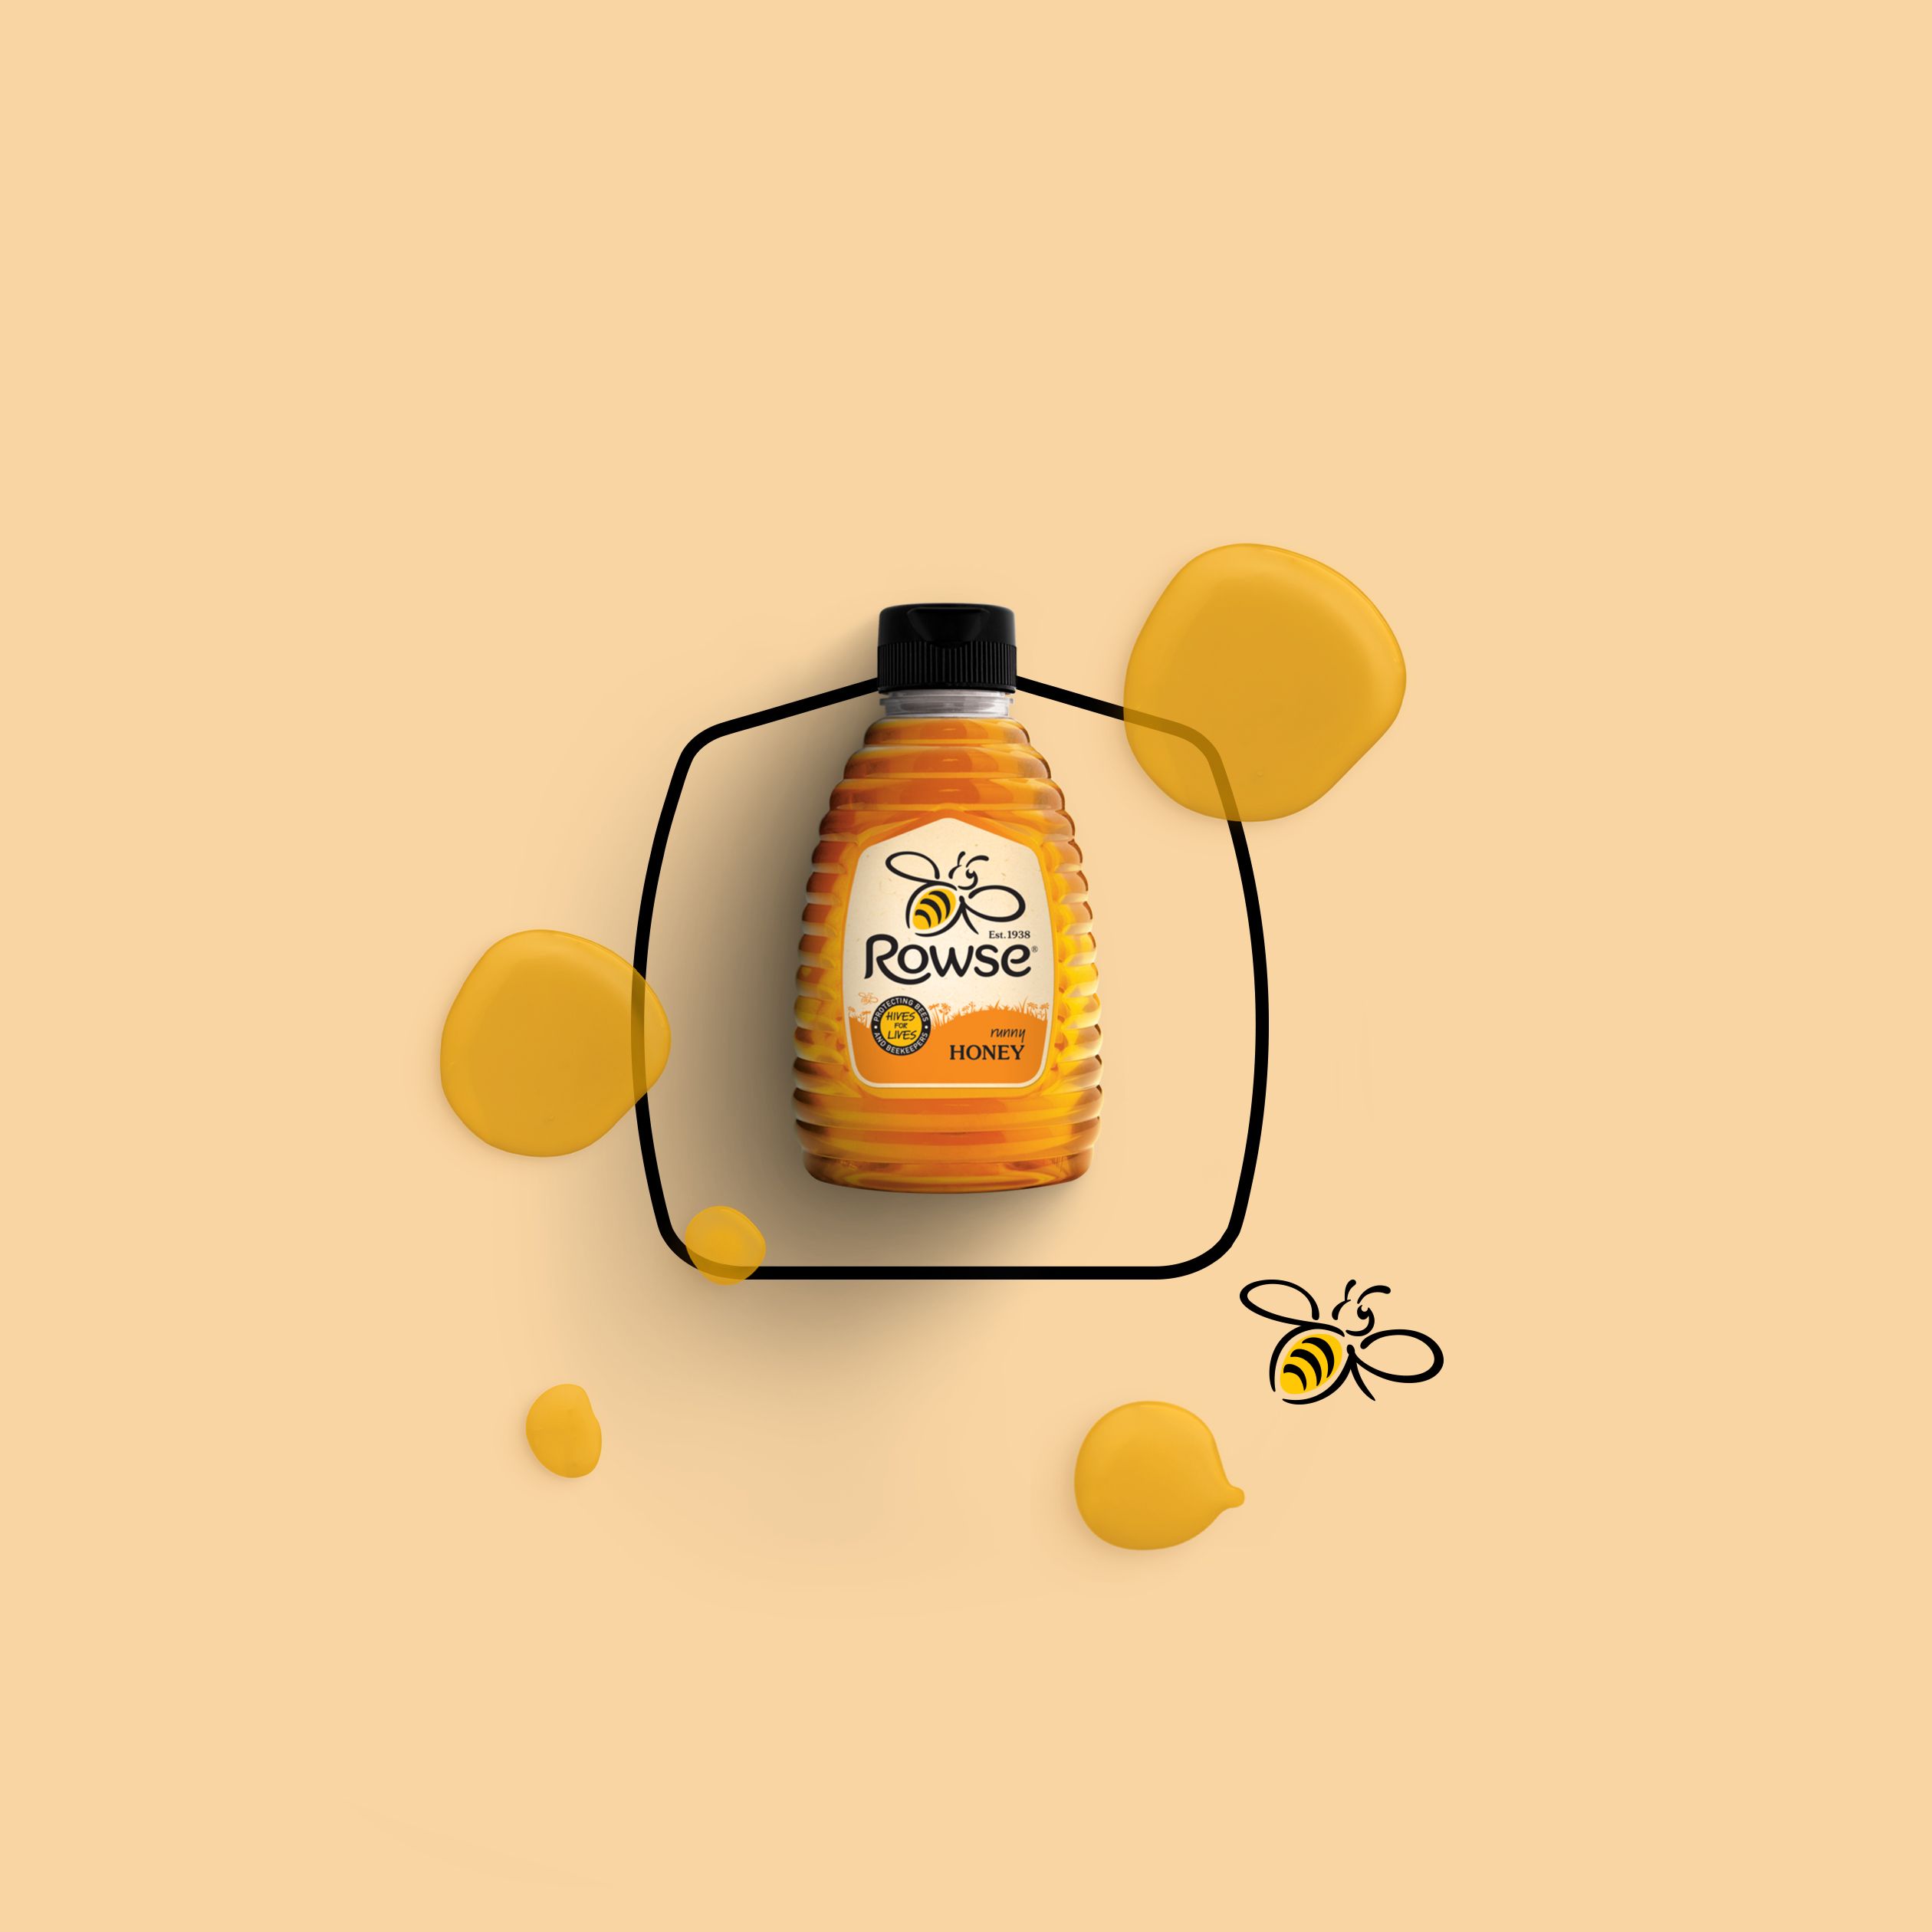 Three-dimensional representation of a Rowse Runny Honey bottle set against a soft yellow backdrop, with flowing honey accents and the iconic Rowse bee logo